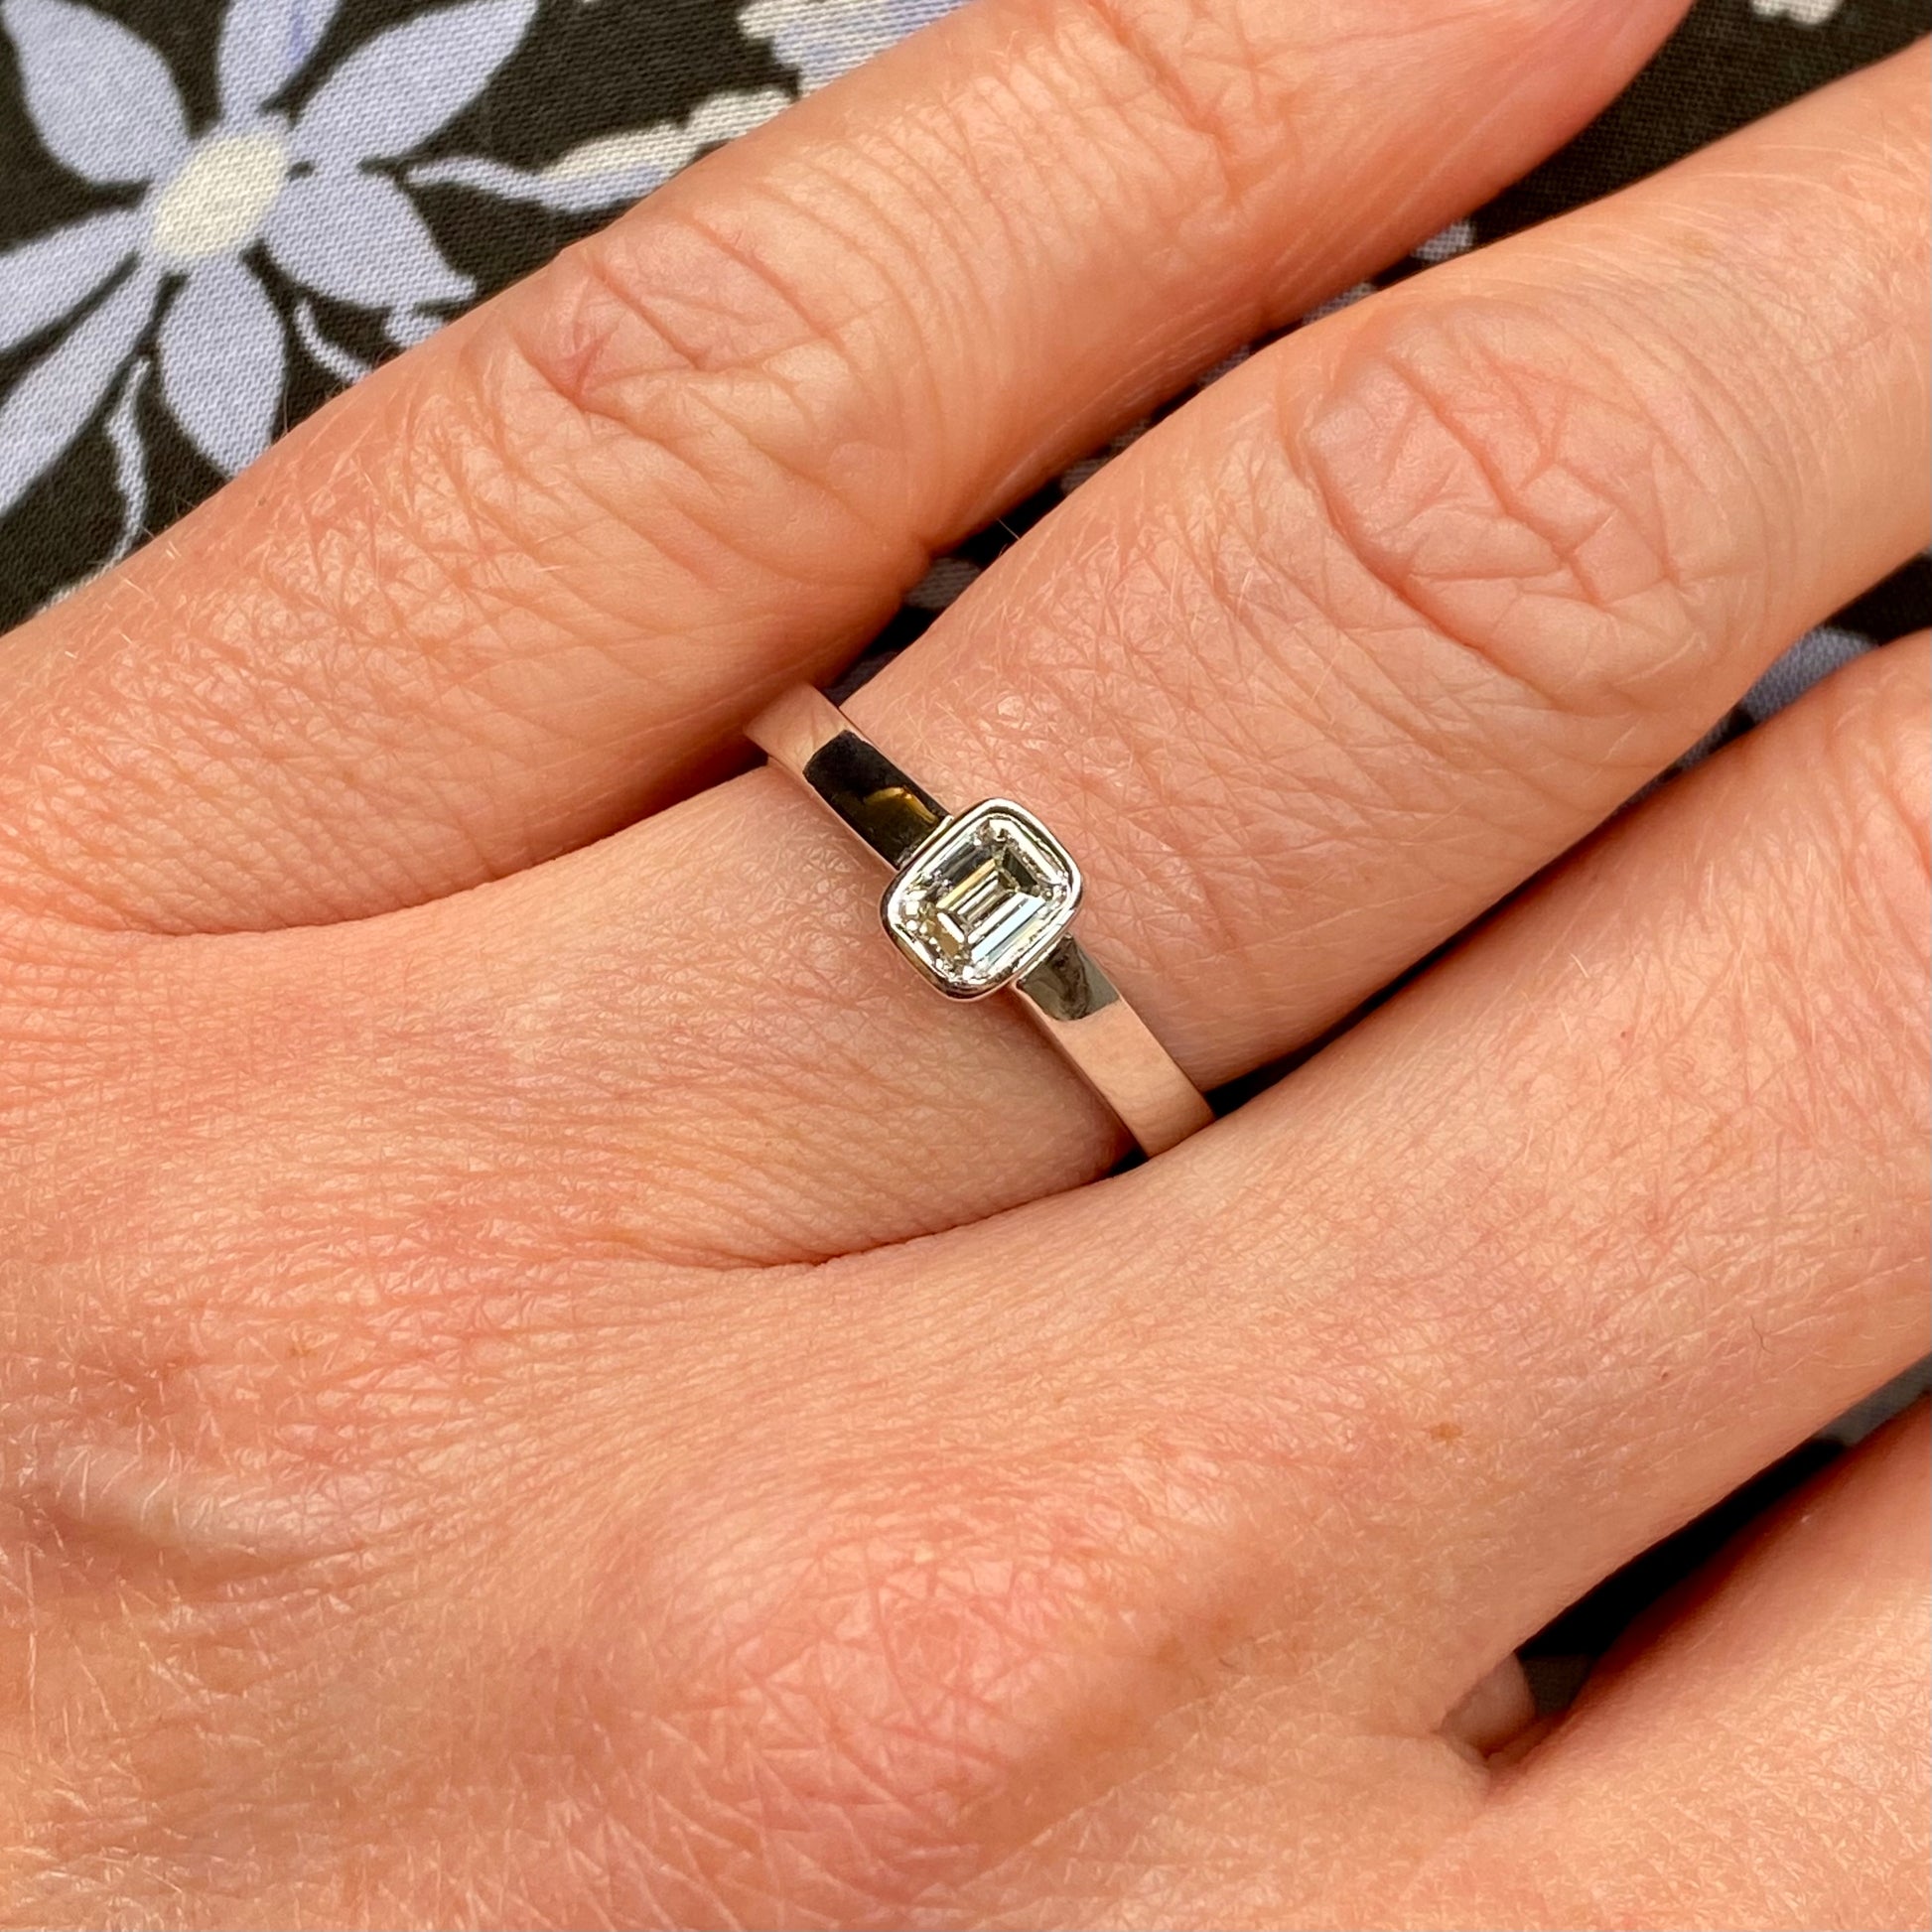 18ct White Gold Emerald Cut Diamond Solitaire Engagement Ring 0.40ct - John Ross Jewellers